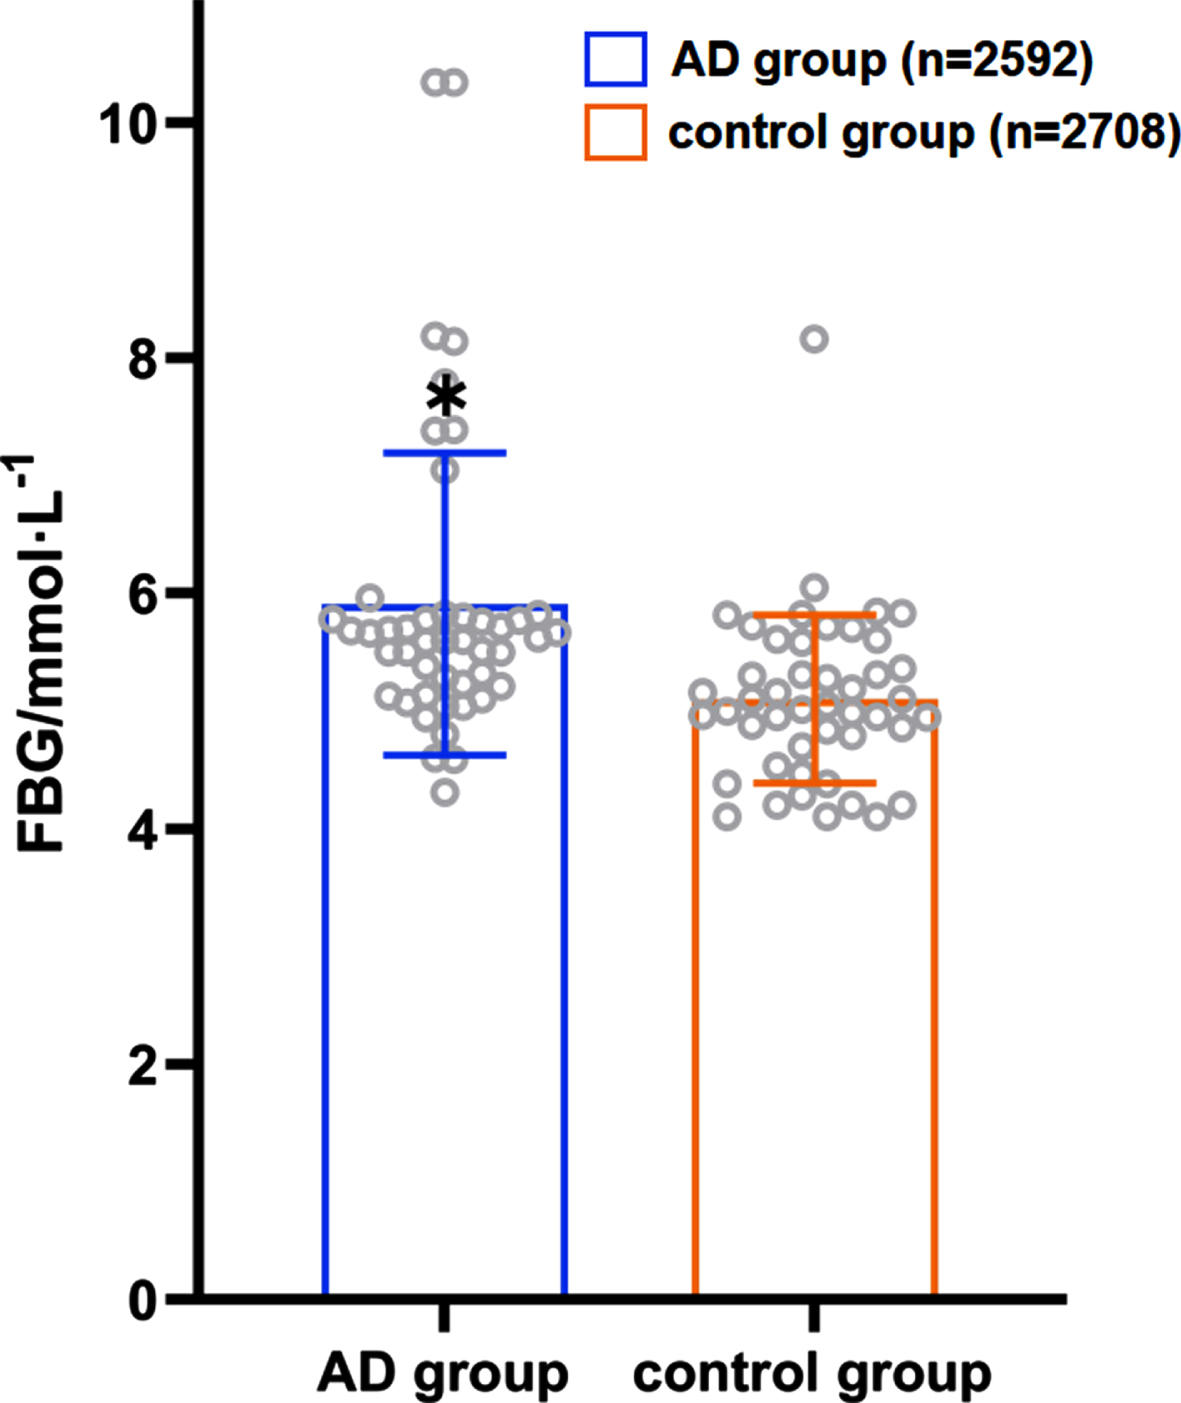 Distribution of the average FBG in the AD patient group and the control group